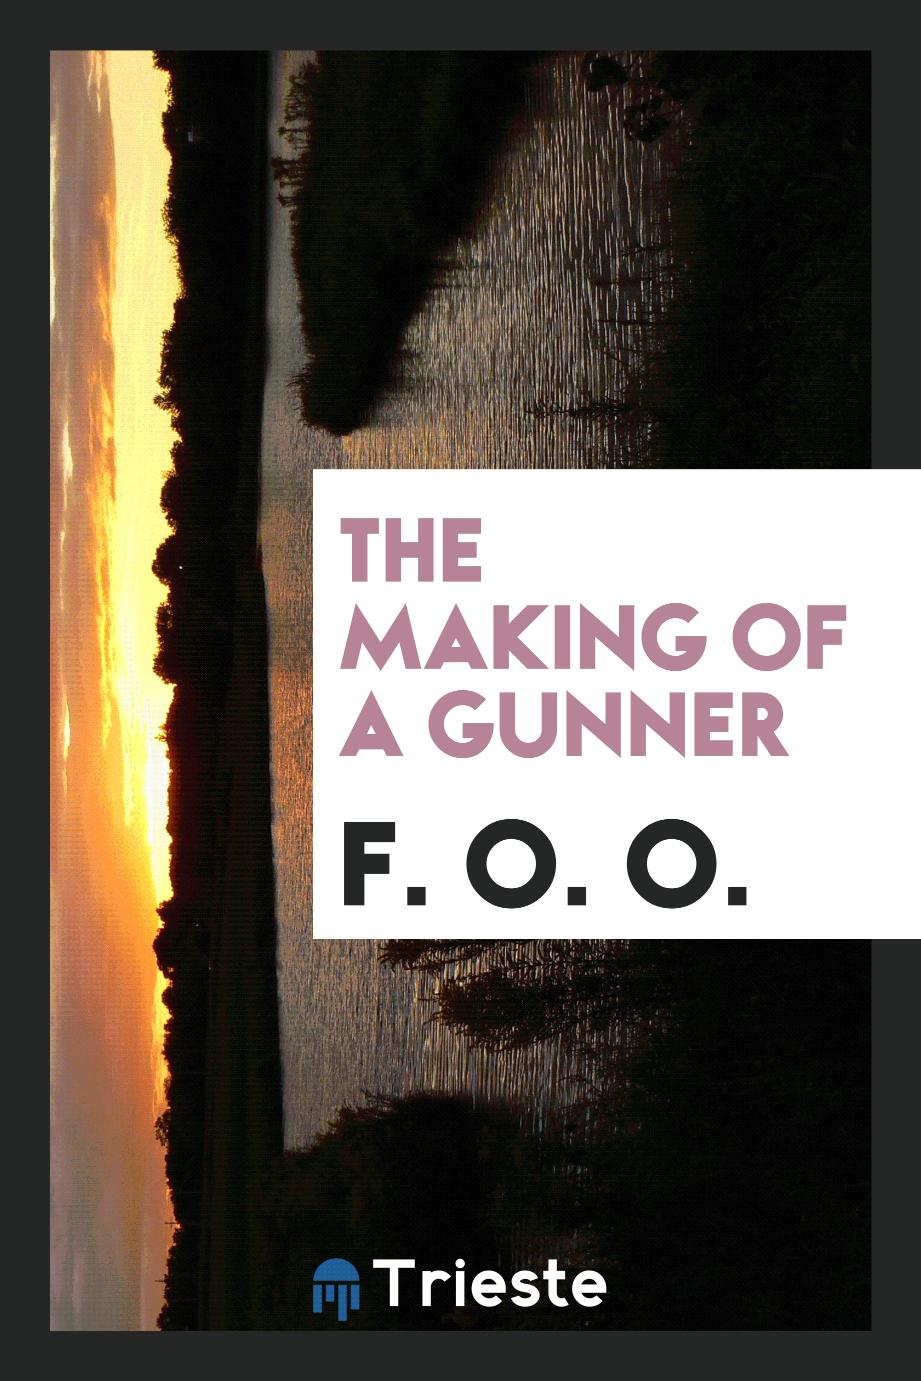 The making of a gunner